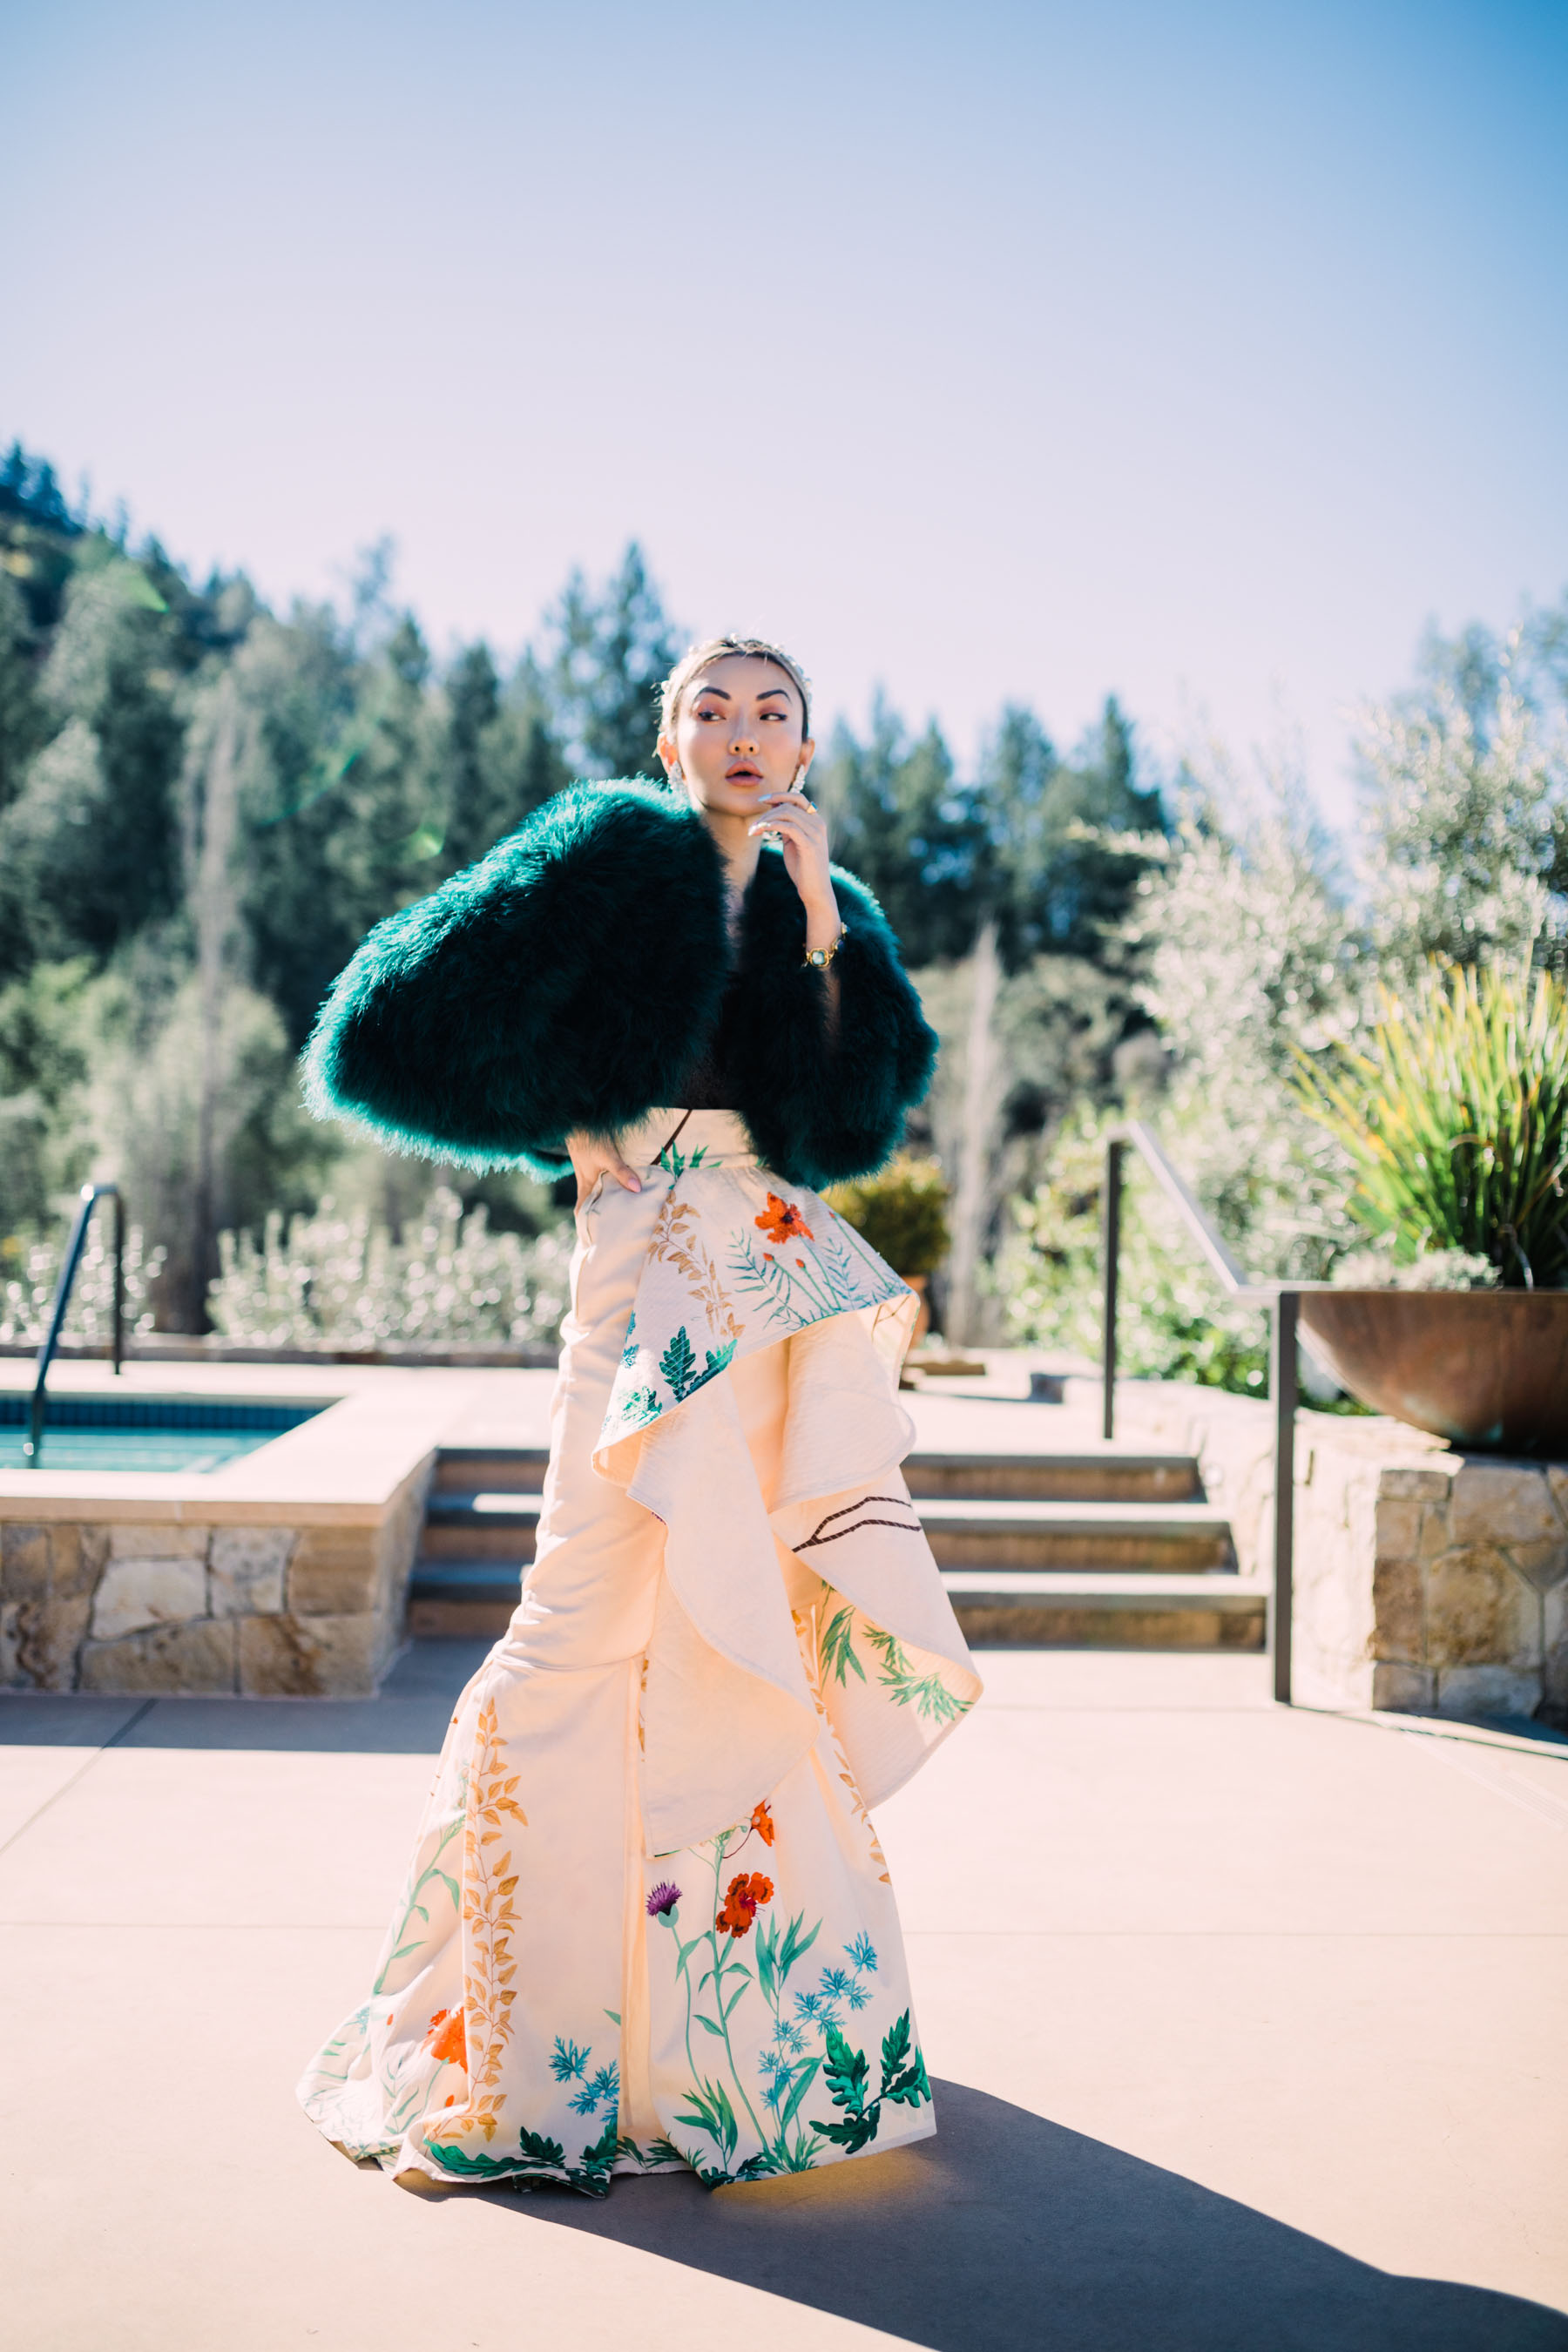 cbd beauty products, embroidered dress, green faux fur jacket // Notjessfashion.com